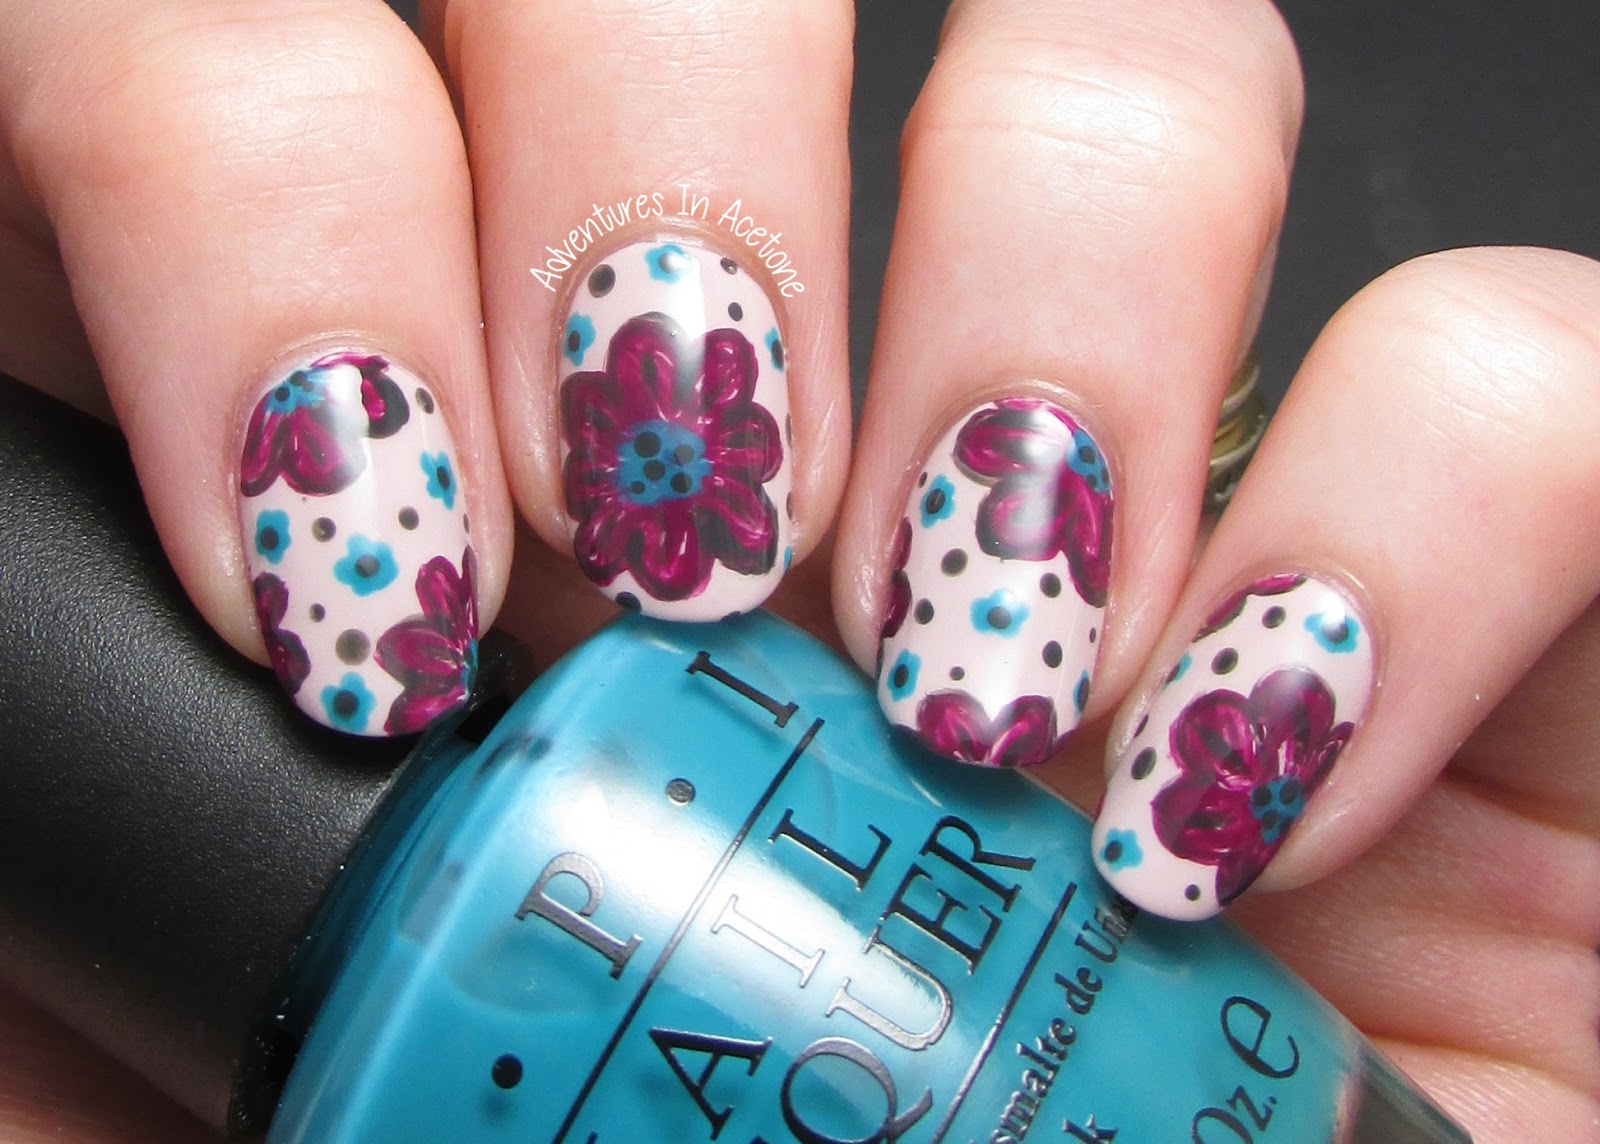 OPI Nail Art Gallery - wide 1